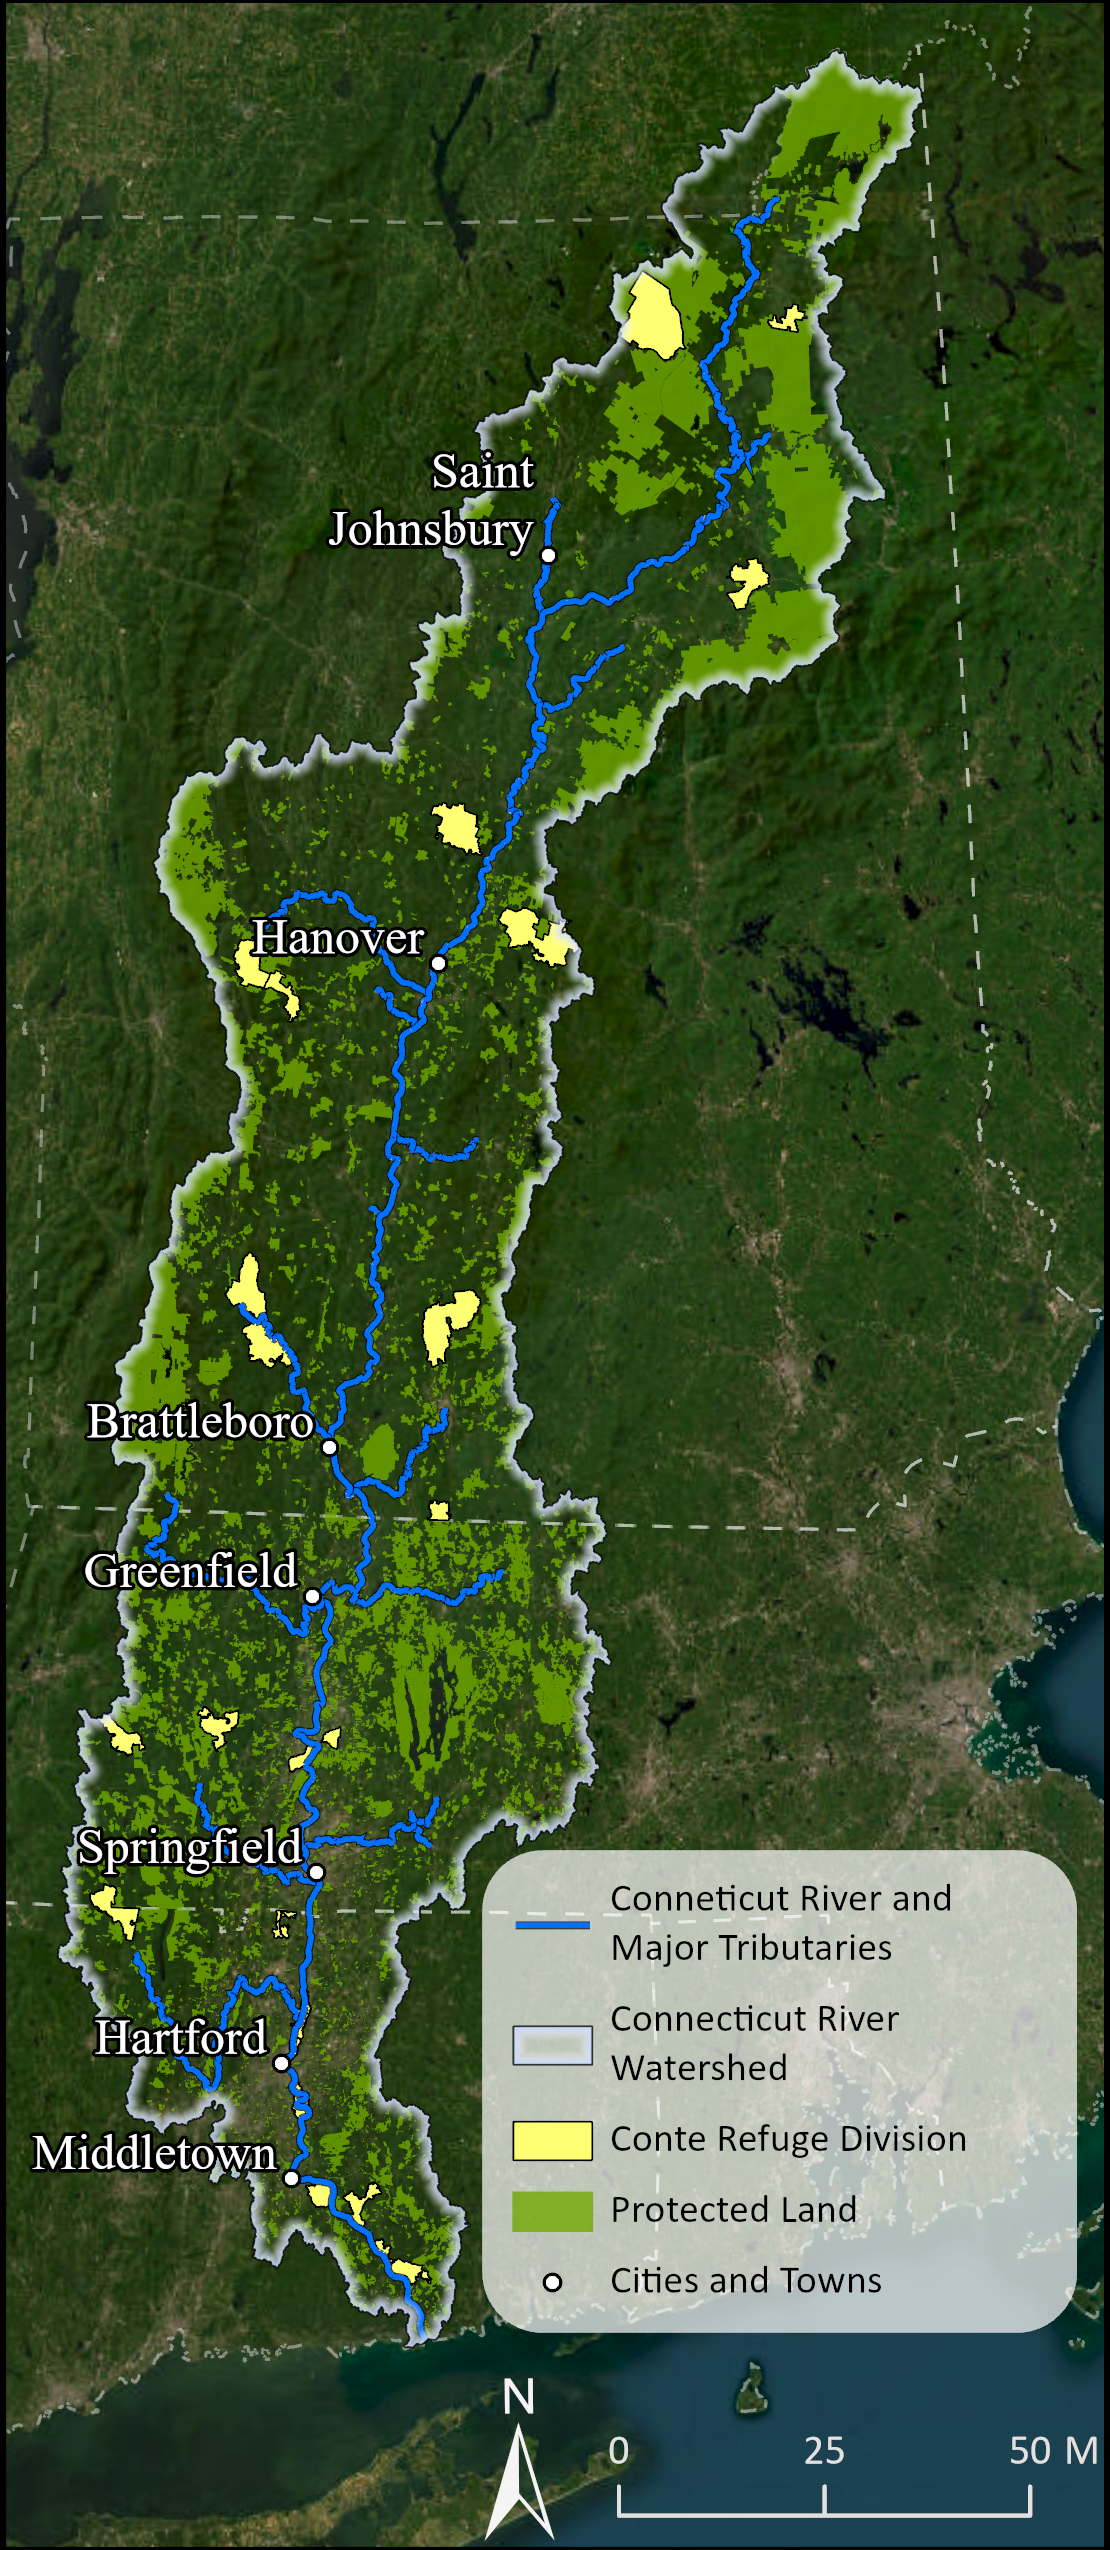 The Connecticut River Watershed